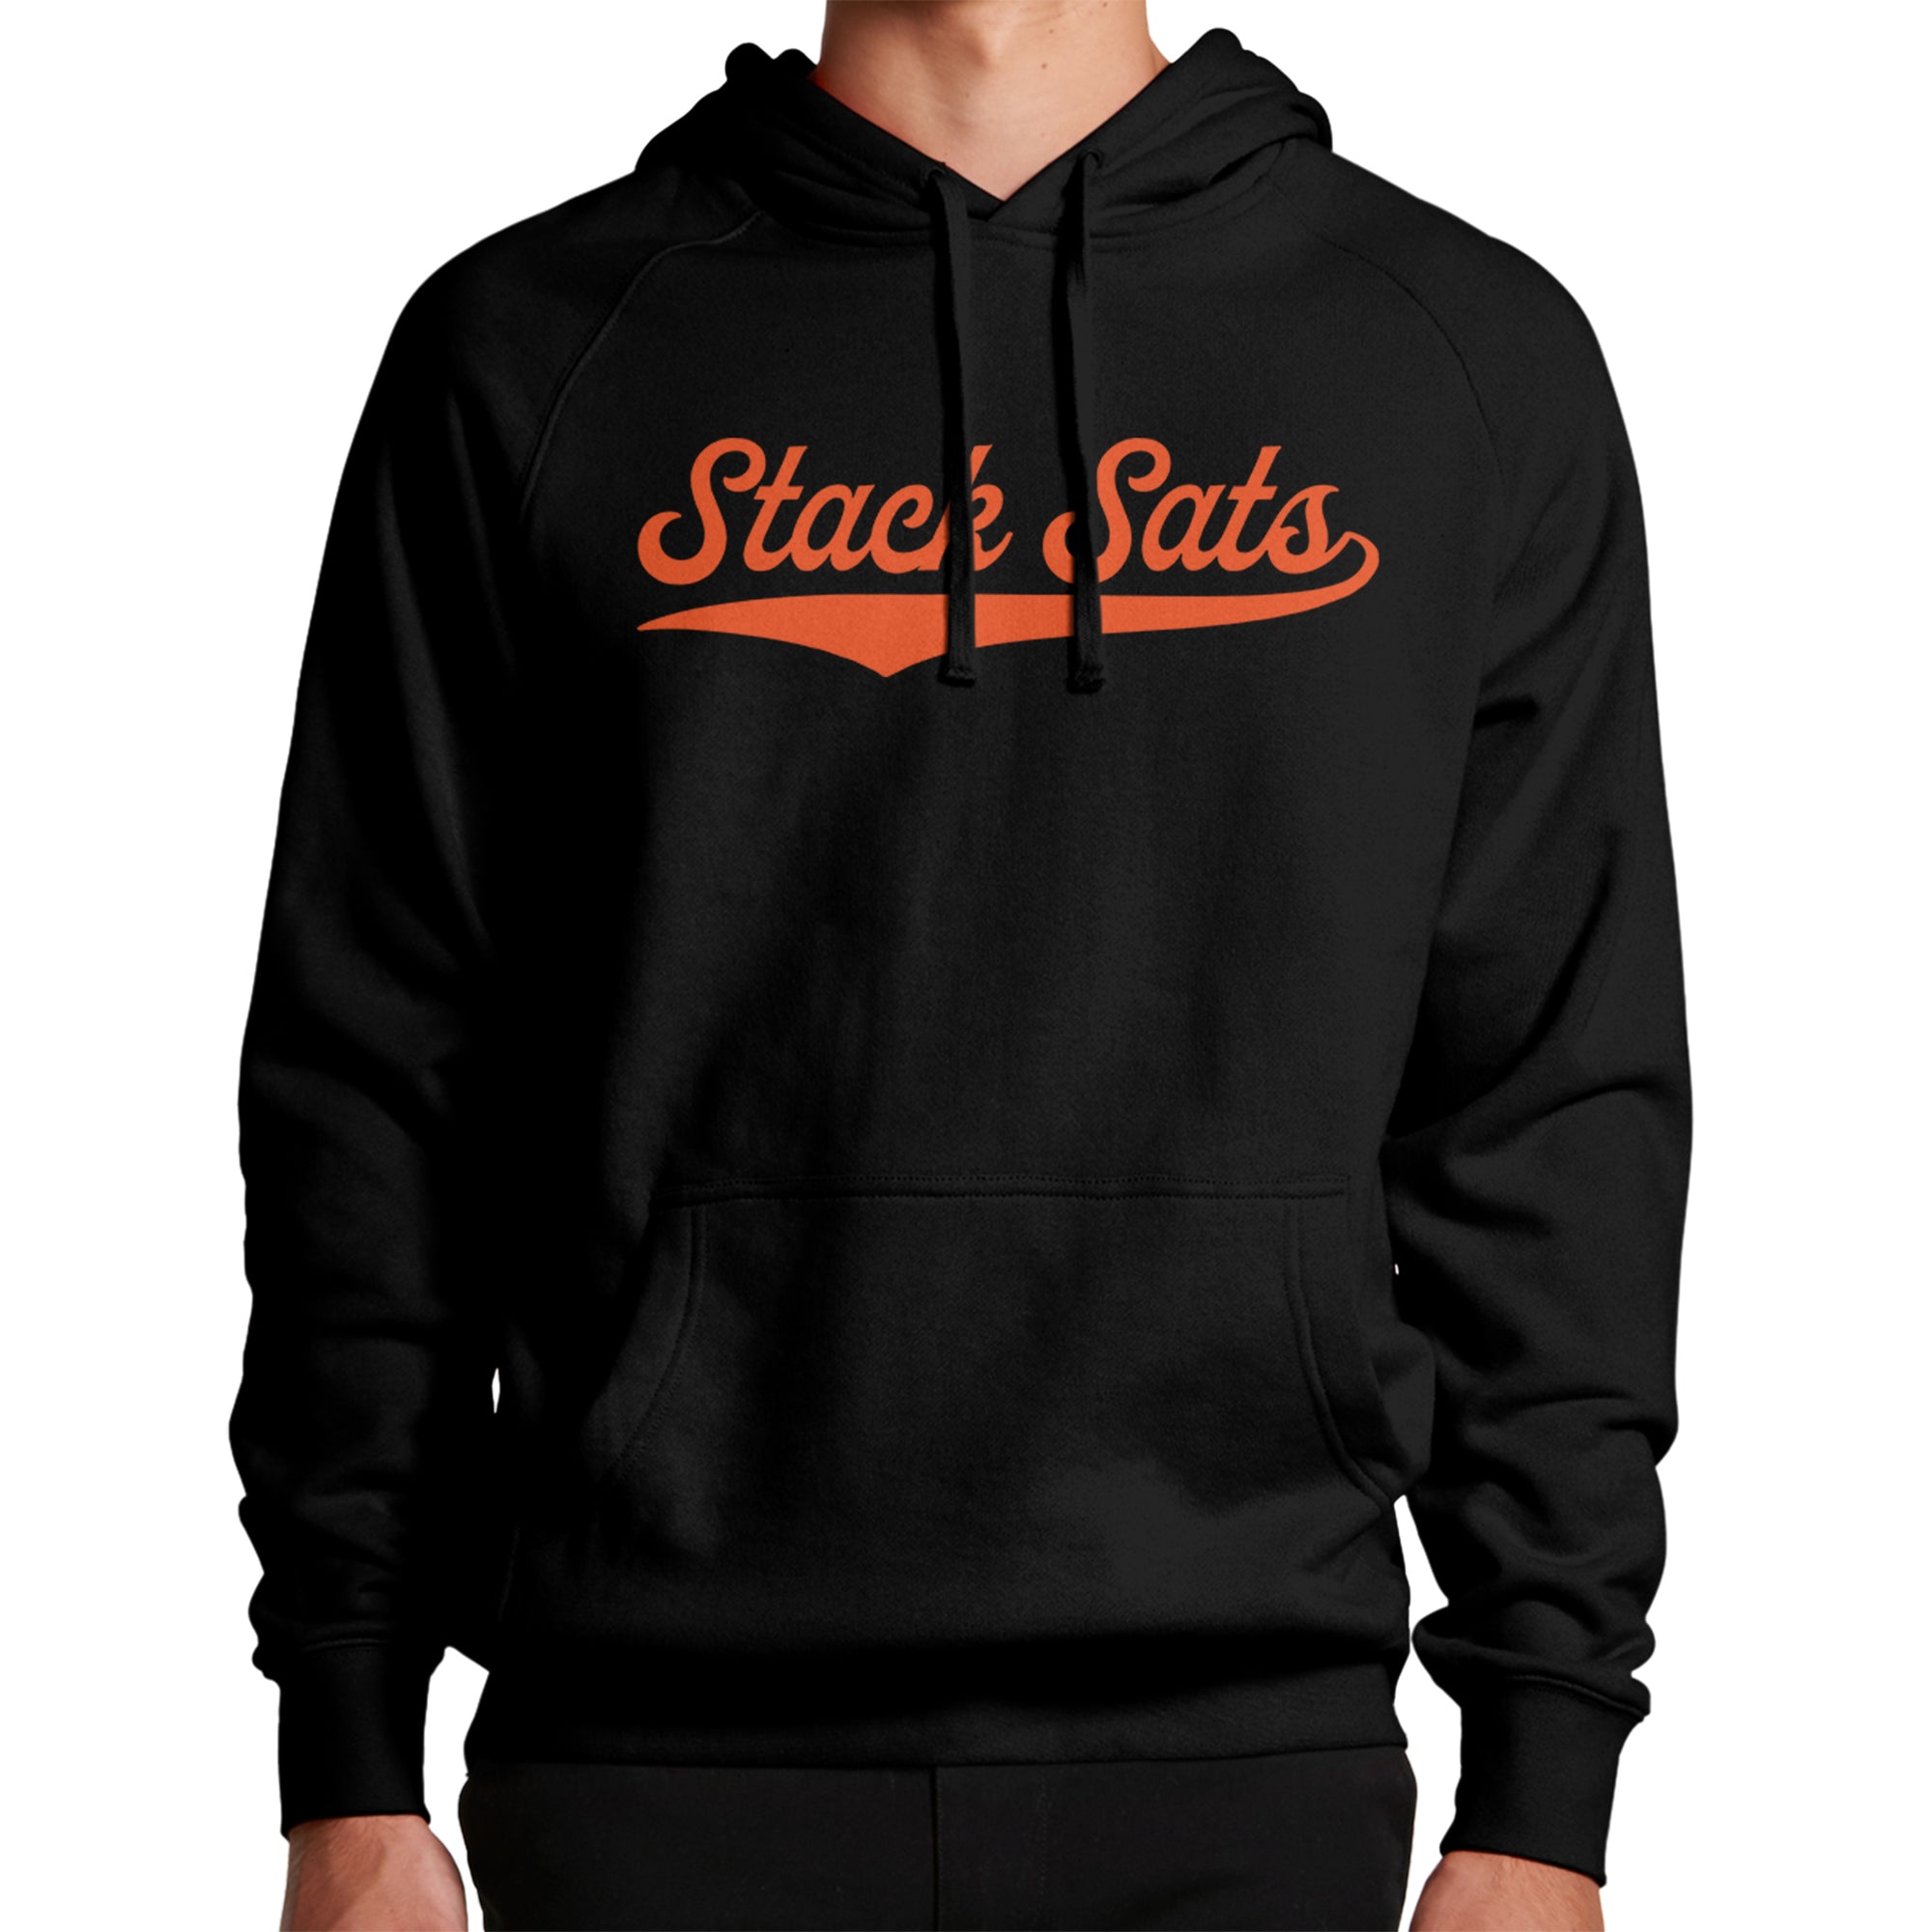 Bitcoin Apparel - Our Stack Sats Hoodie features an orange script logo. Hoodie color: Black. Model image (front view).